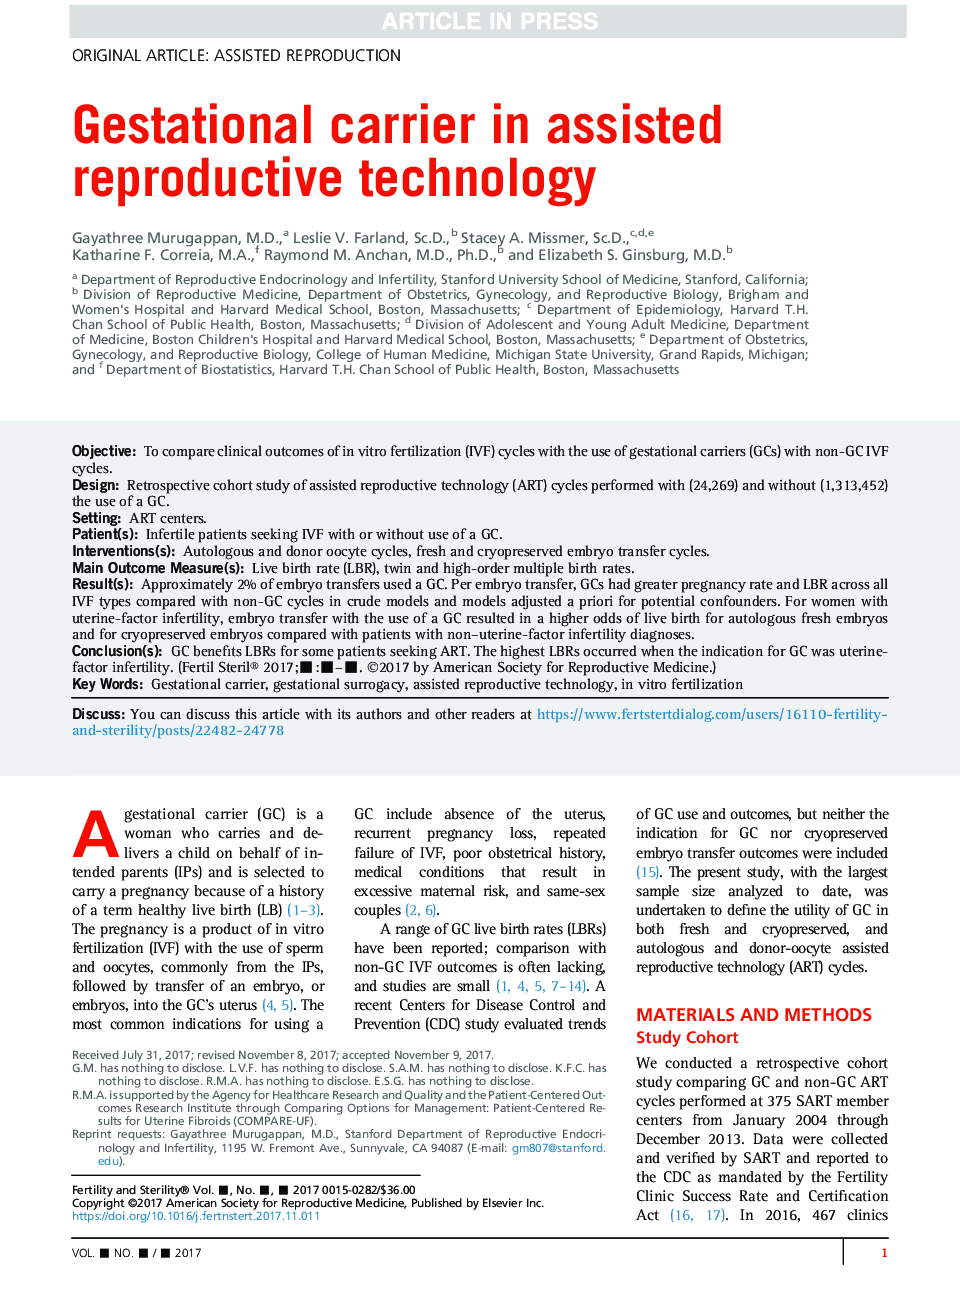 Gestational carrier in assisted reproductive technology